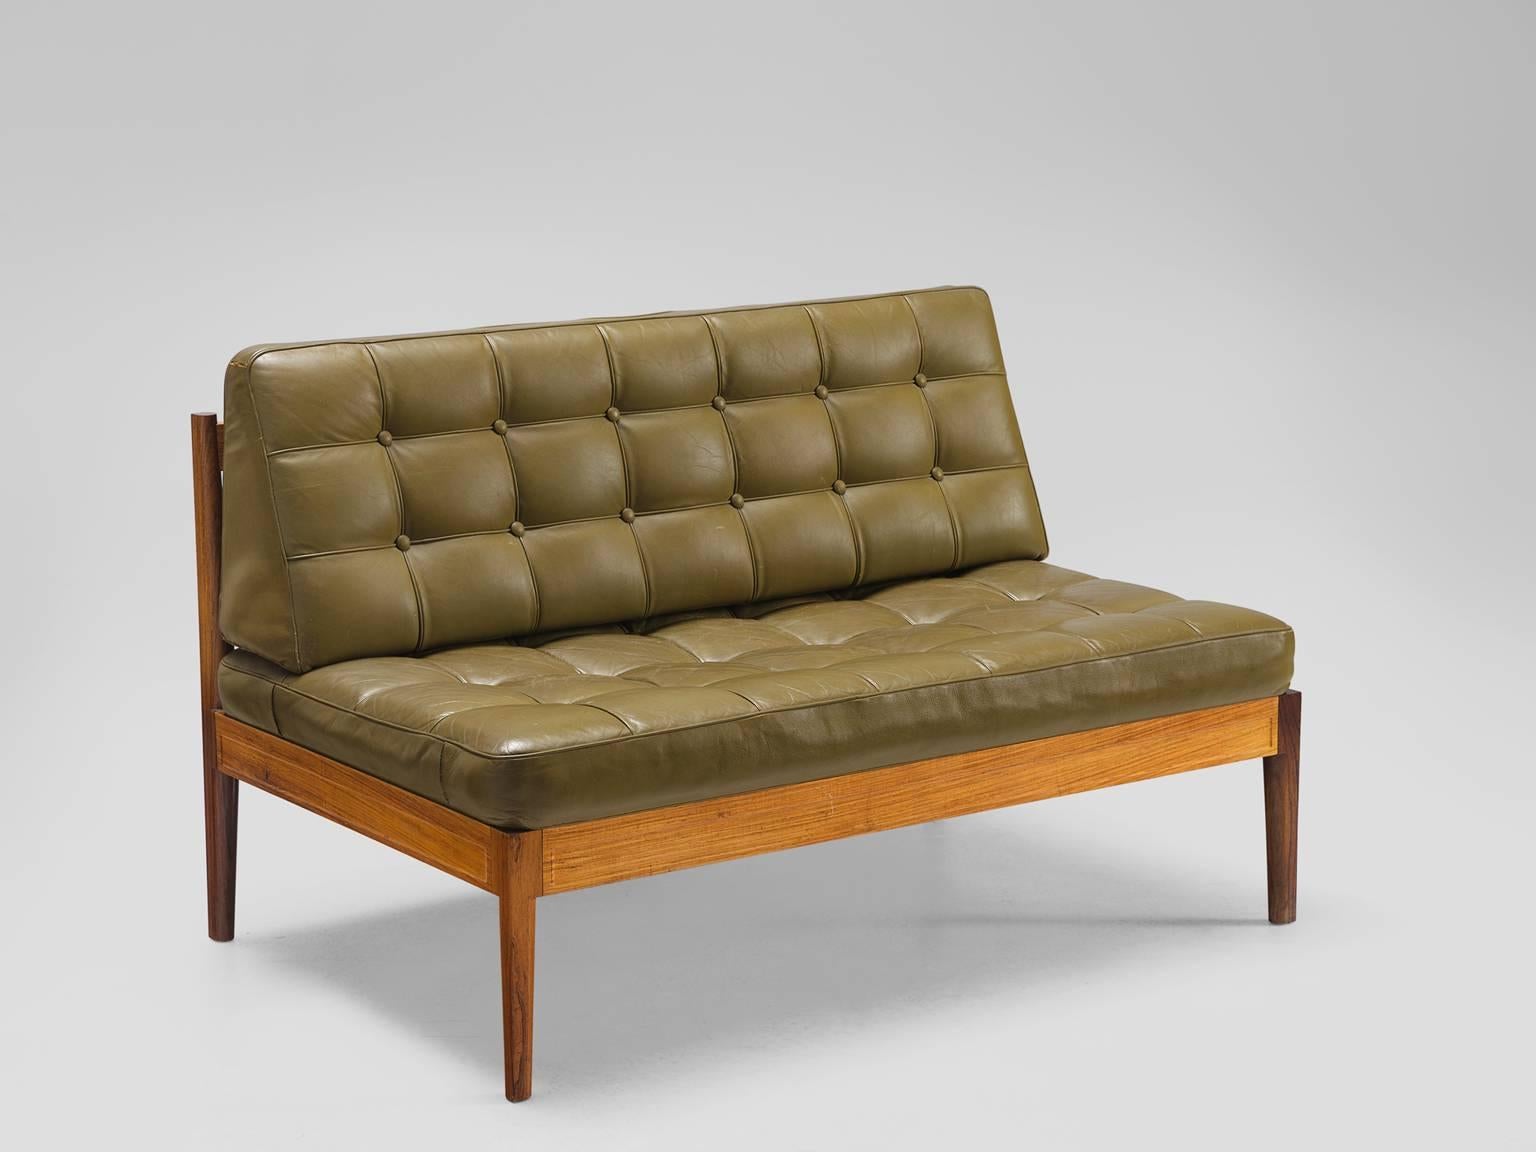 Finn Juhl for France & Søn, 'Diplomat', leather and rosewood, Denmark, 1960s

This small solemn rosewood bench is upholstered with an olive green tufted seat and back. The sofa is part of the 'Diplomat' series by the Dane Finn Juhl. The design